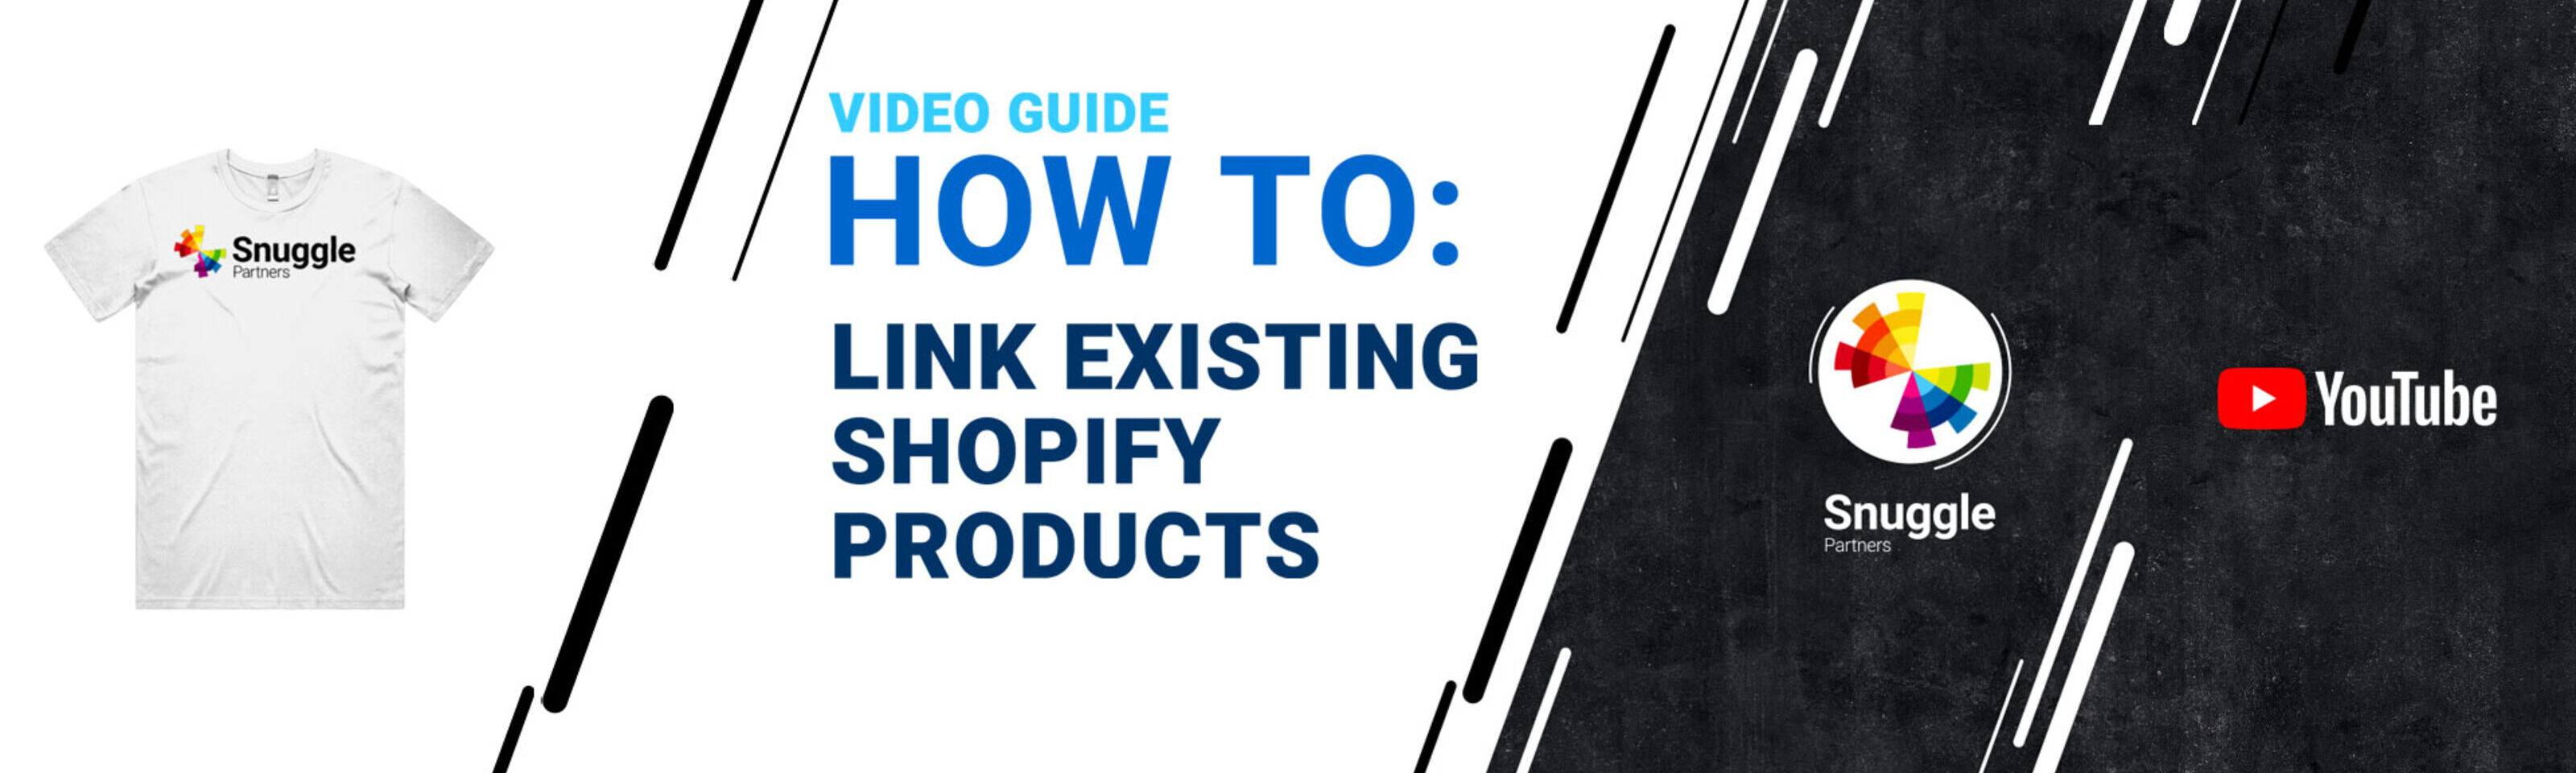 HOW TO: Link Existing Shopify Products